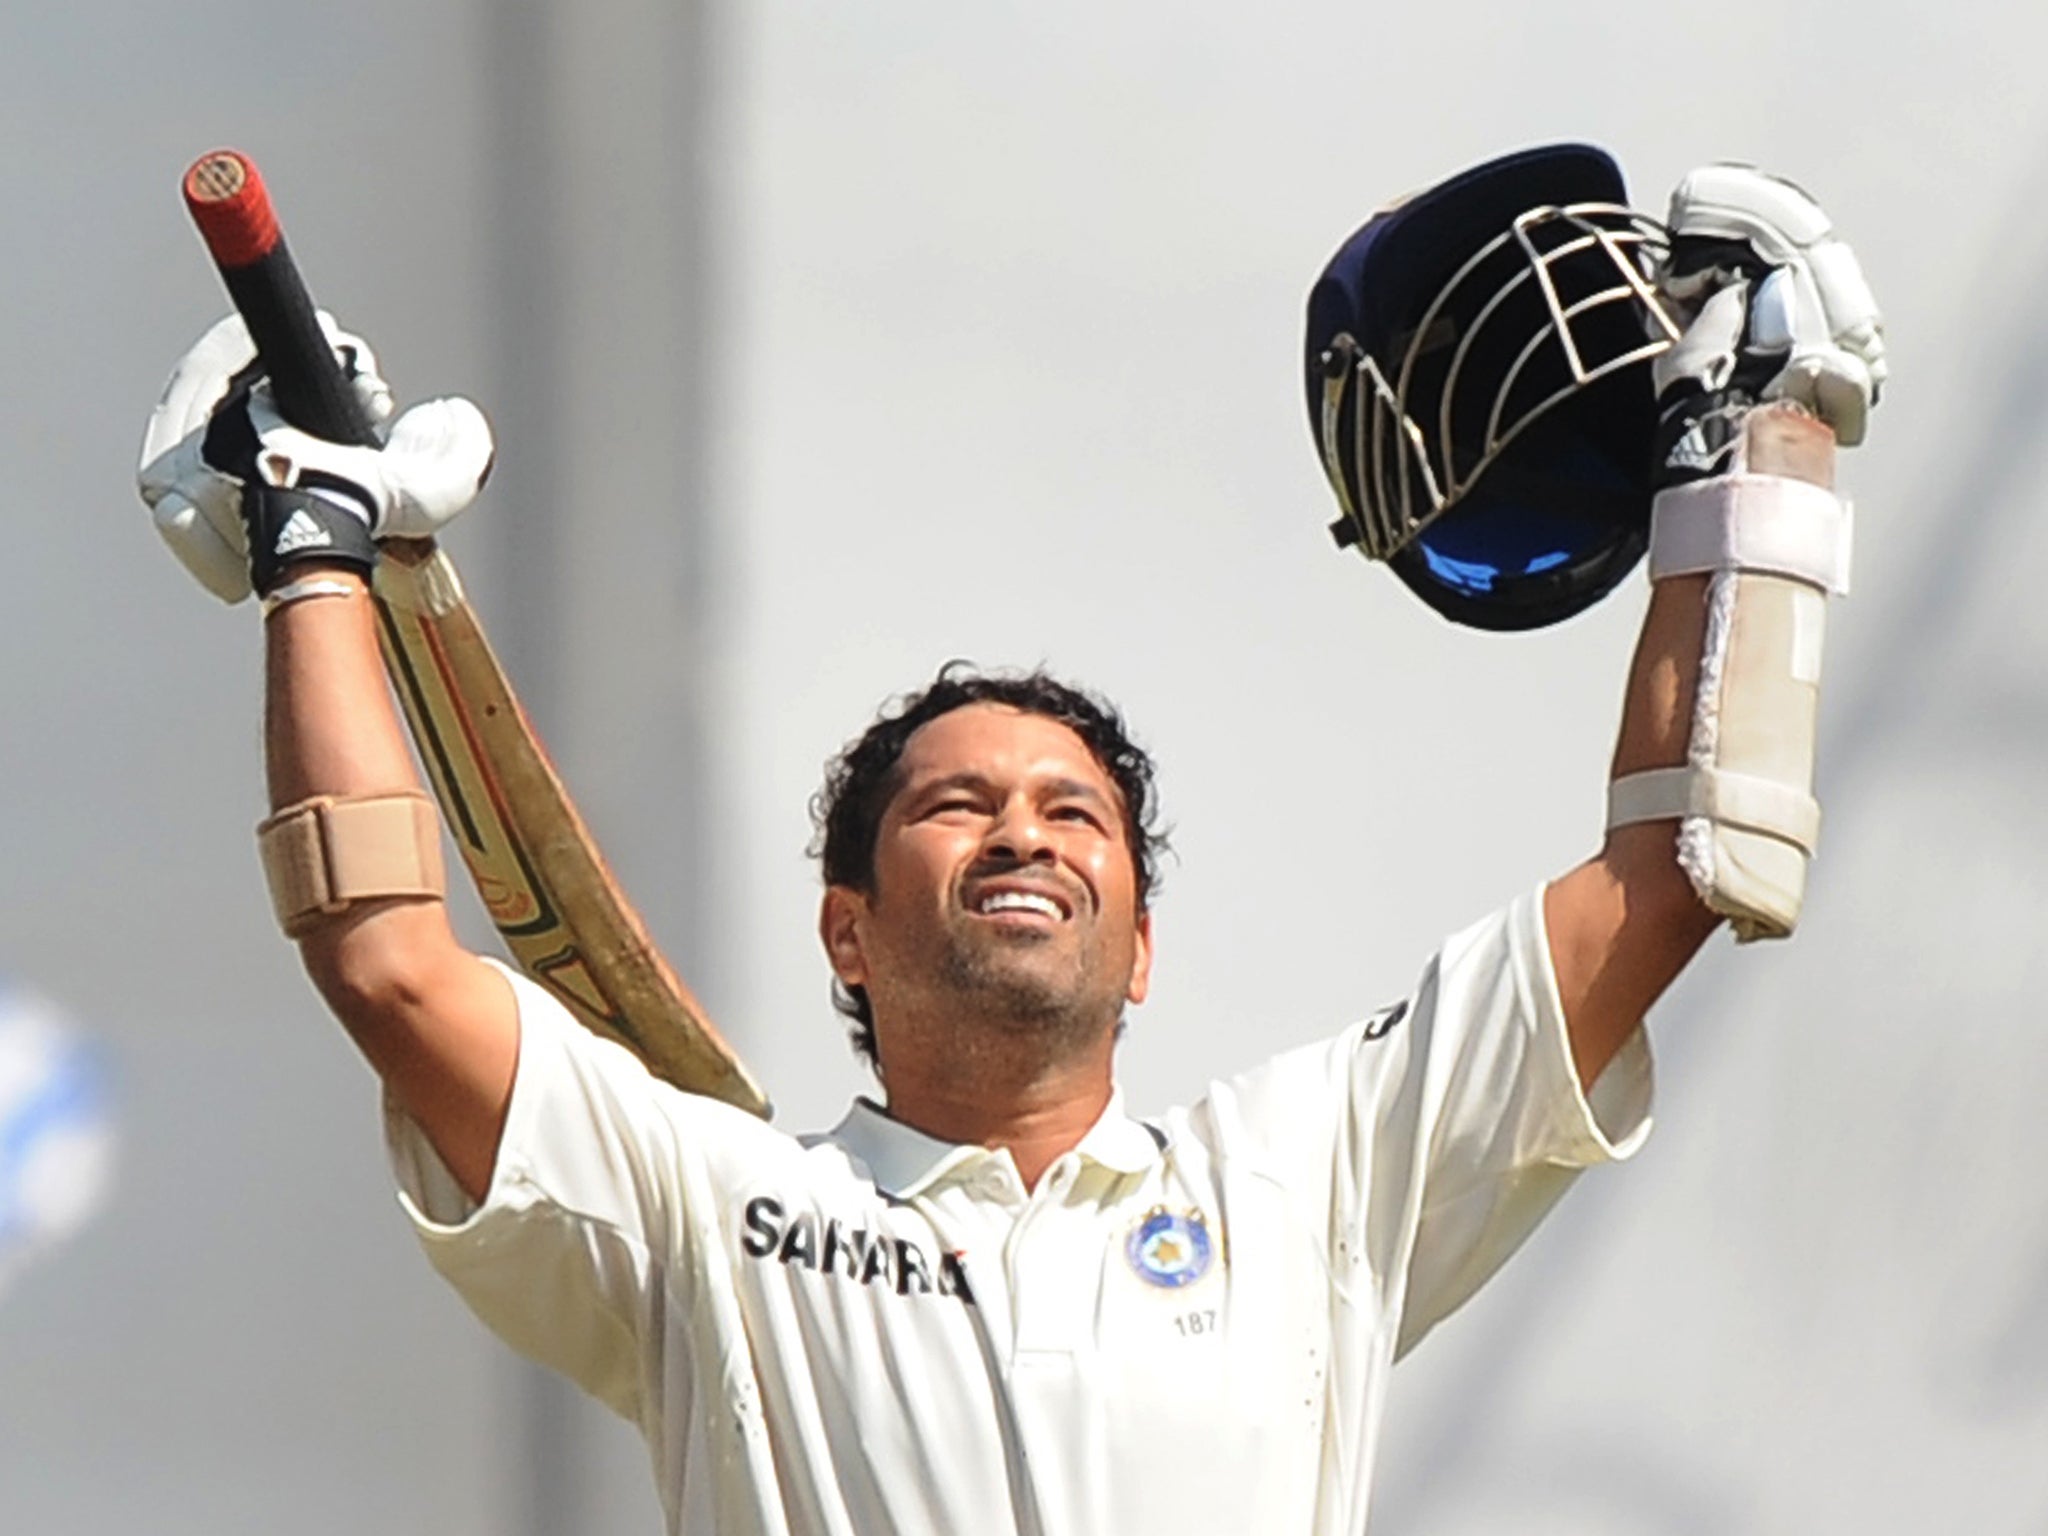 Indian cricketer Sachin Tendulkar celebrates after scoring a double century. He scored his first double century on 24 February 2010